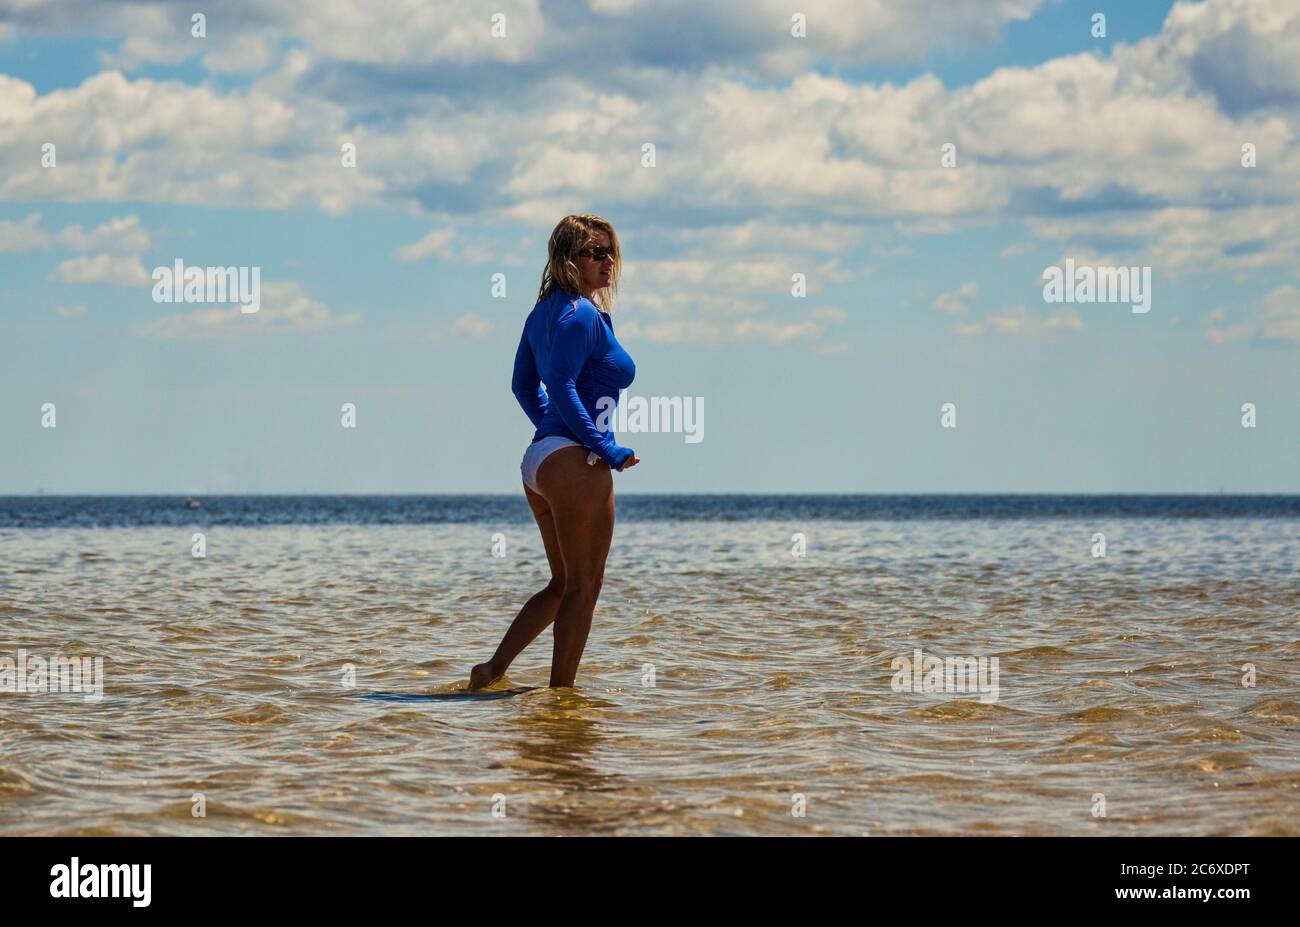 Physically Fit woman in a bikini with a blue cover up standing along the shoreline Stock Photo